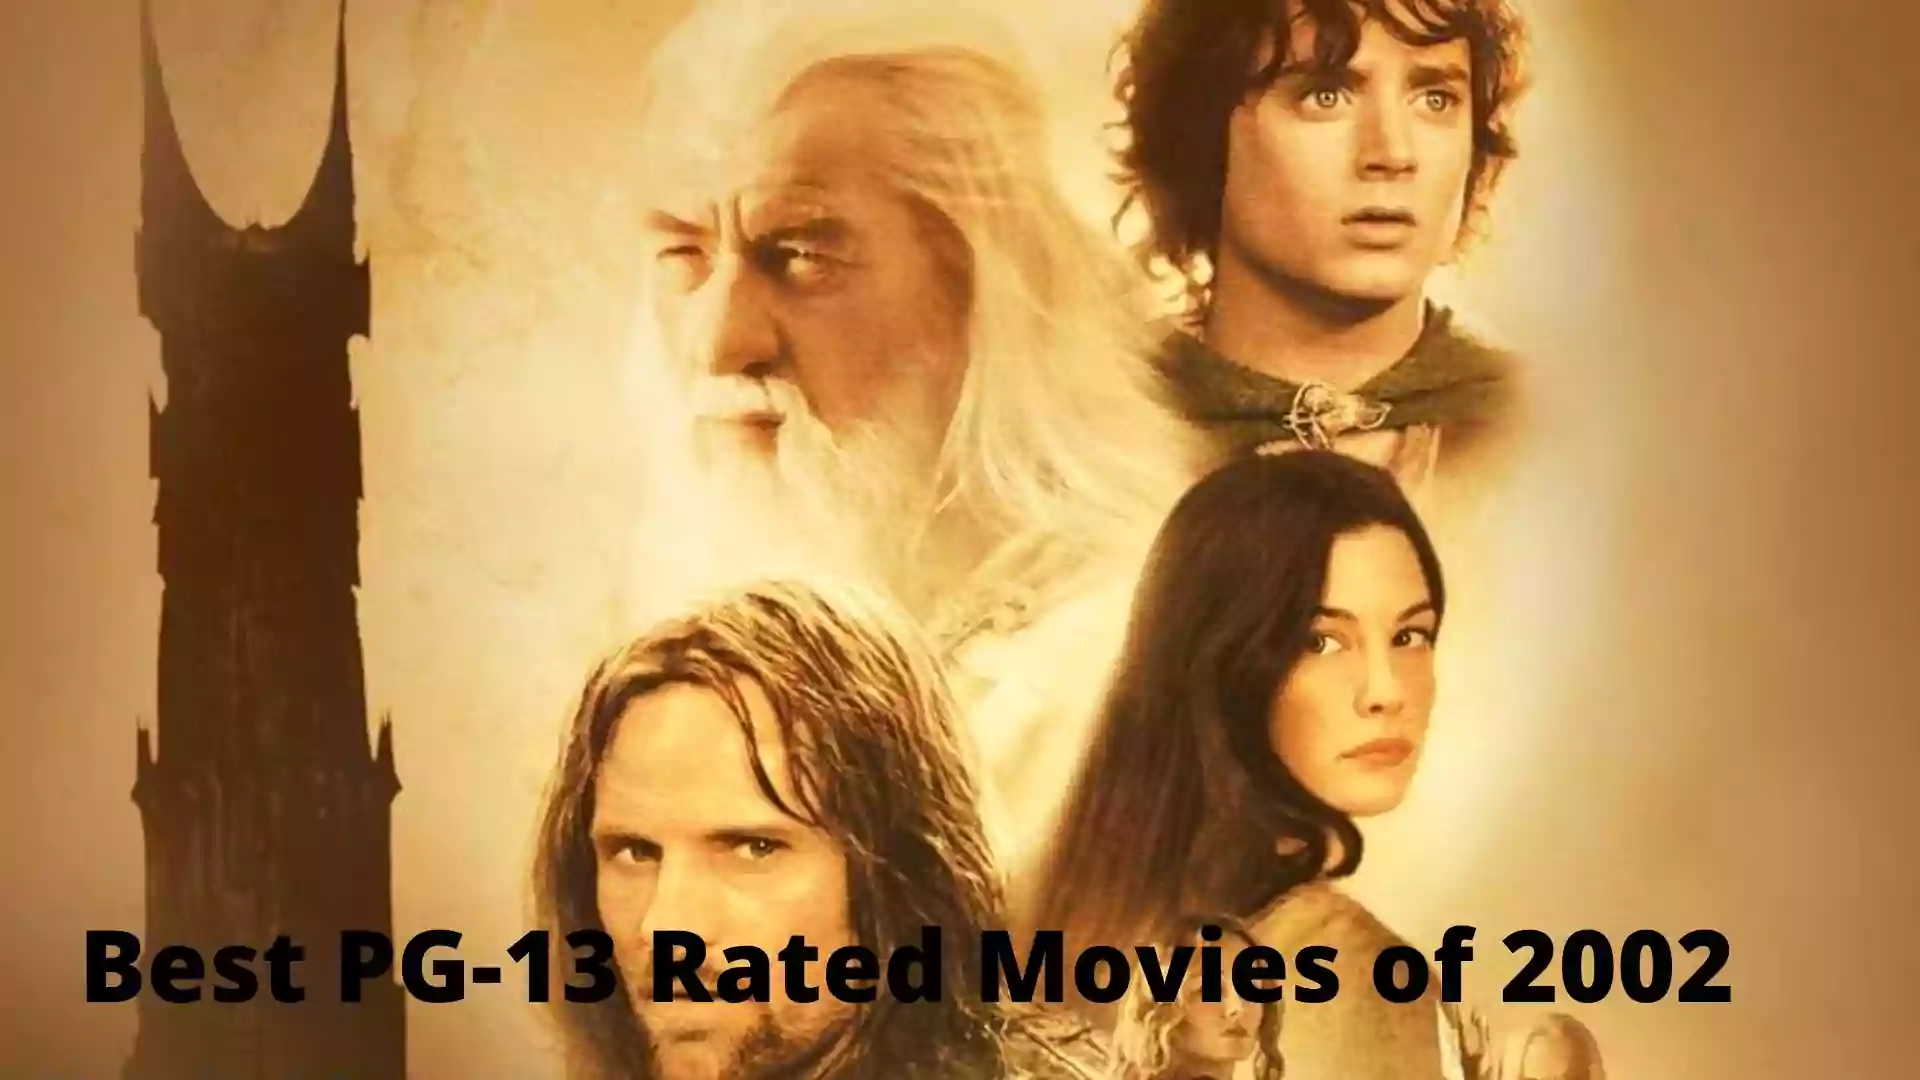 Best PG-13 Rated Movies of 2002